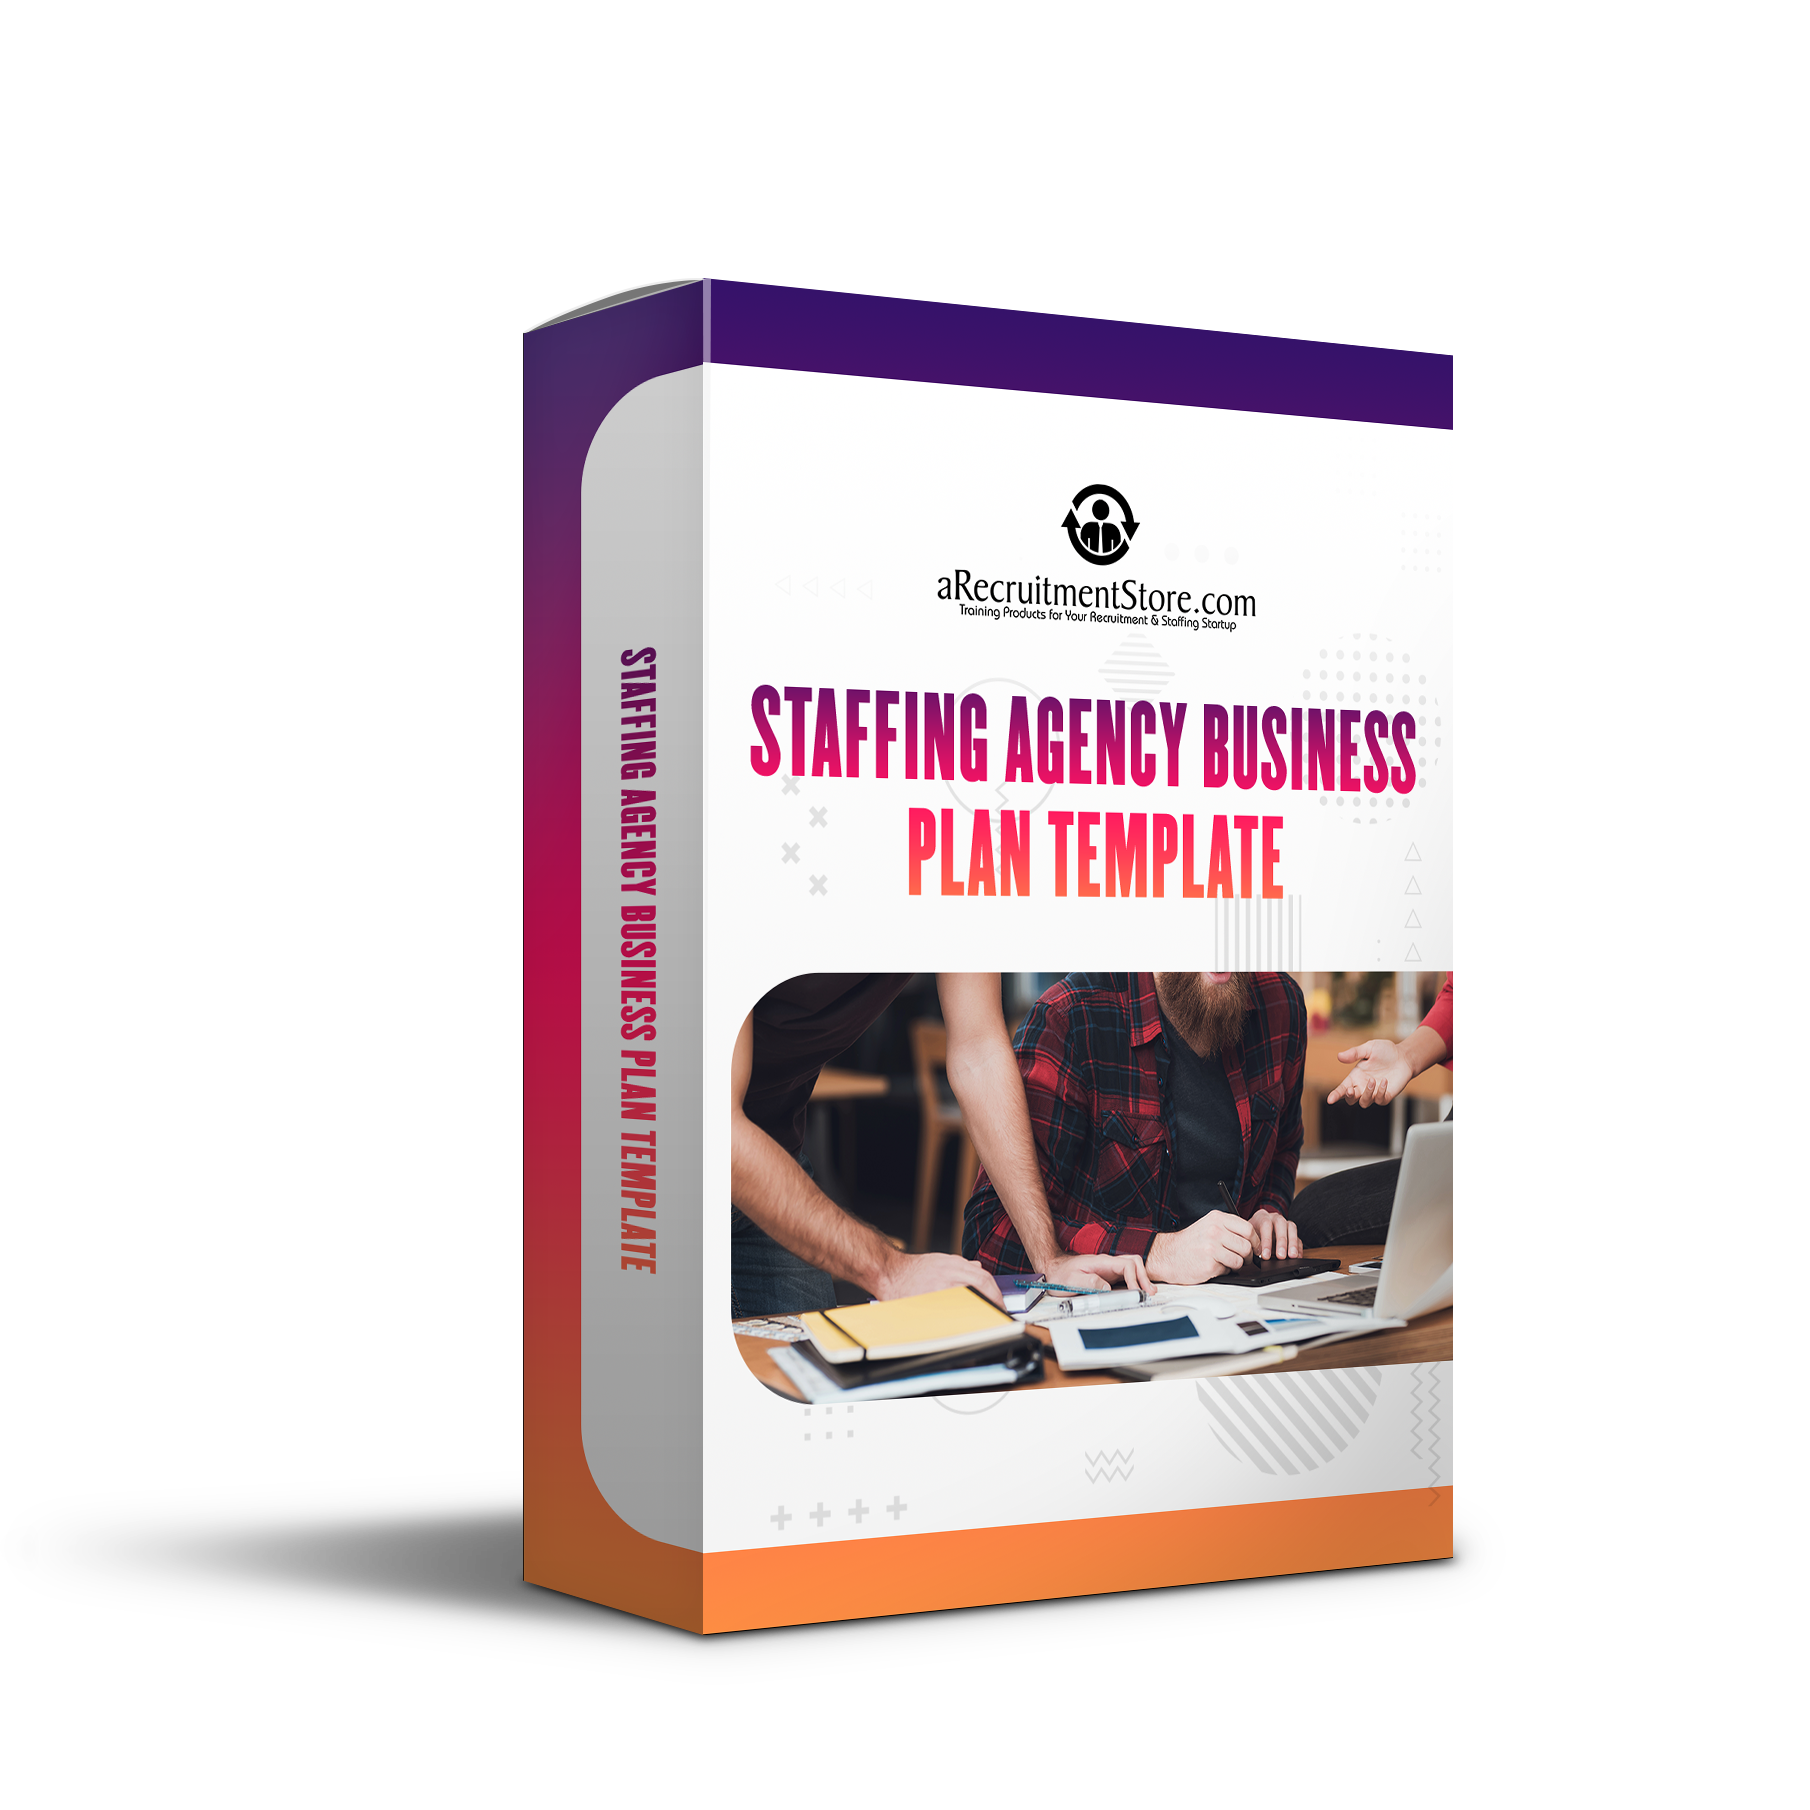 Staffing Agency Business Plan Template - aRecruitmentStore.com In Recruitment Agency Business Plan Template